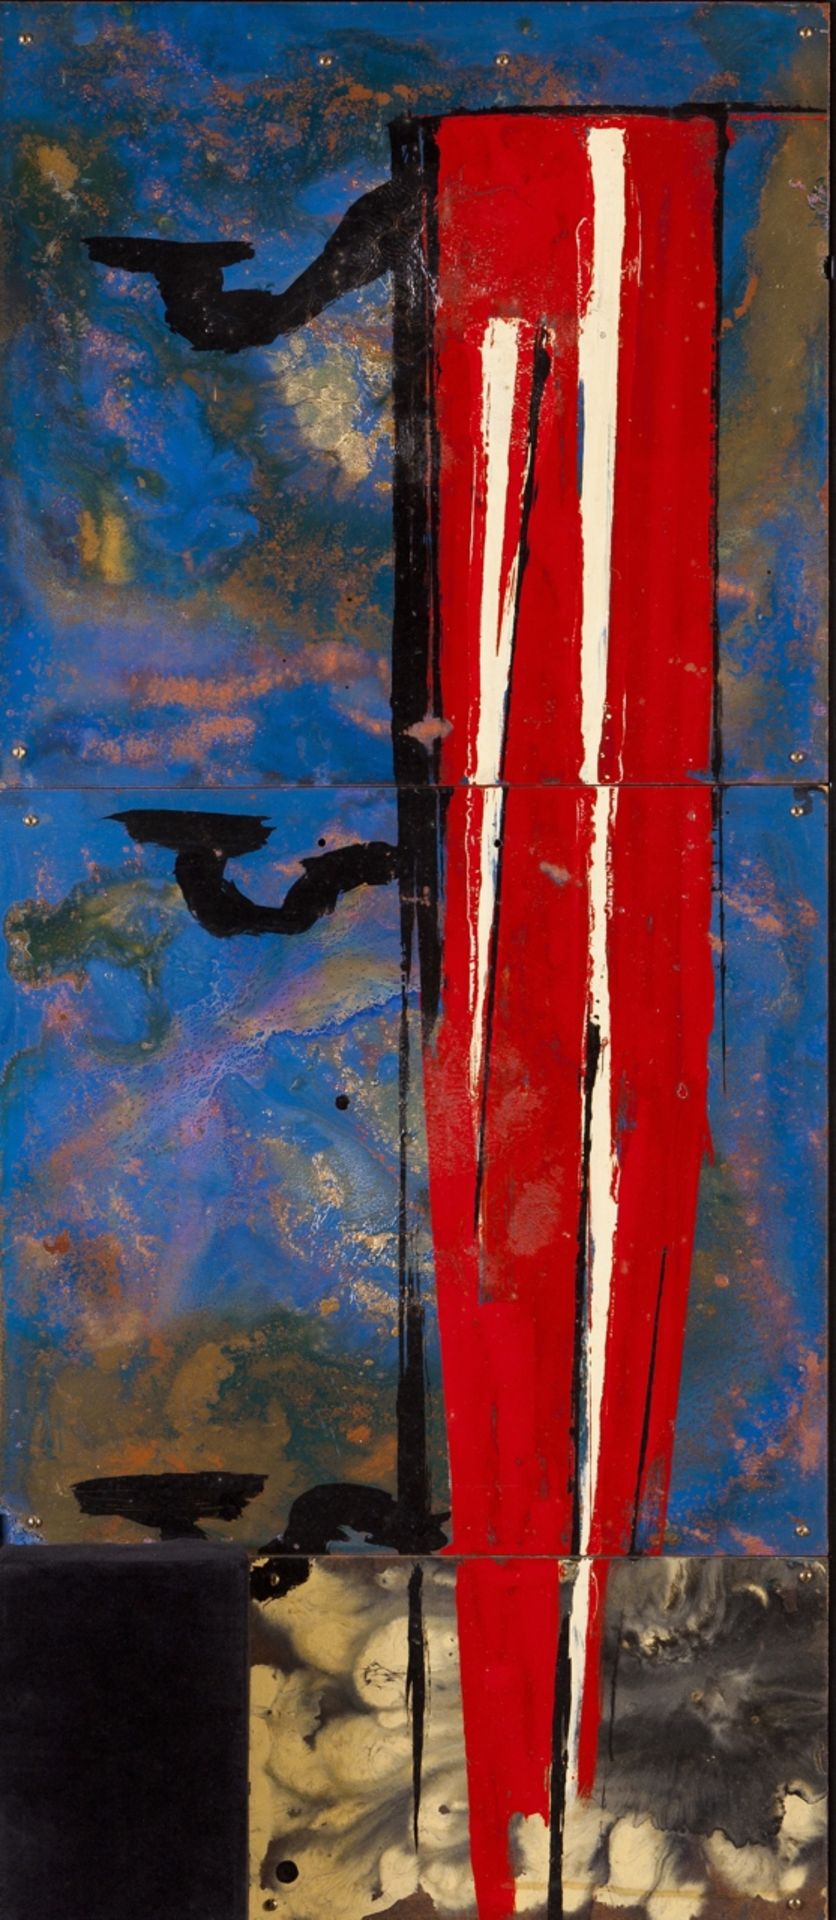 João Paulo Feliciano (b.1963)  Untitled  Mixed media on wood  Signed and dated 87    96,5x42x6 cm